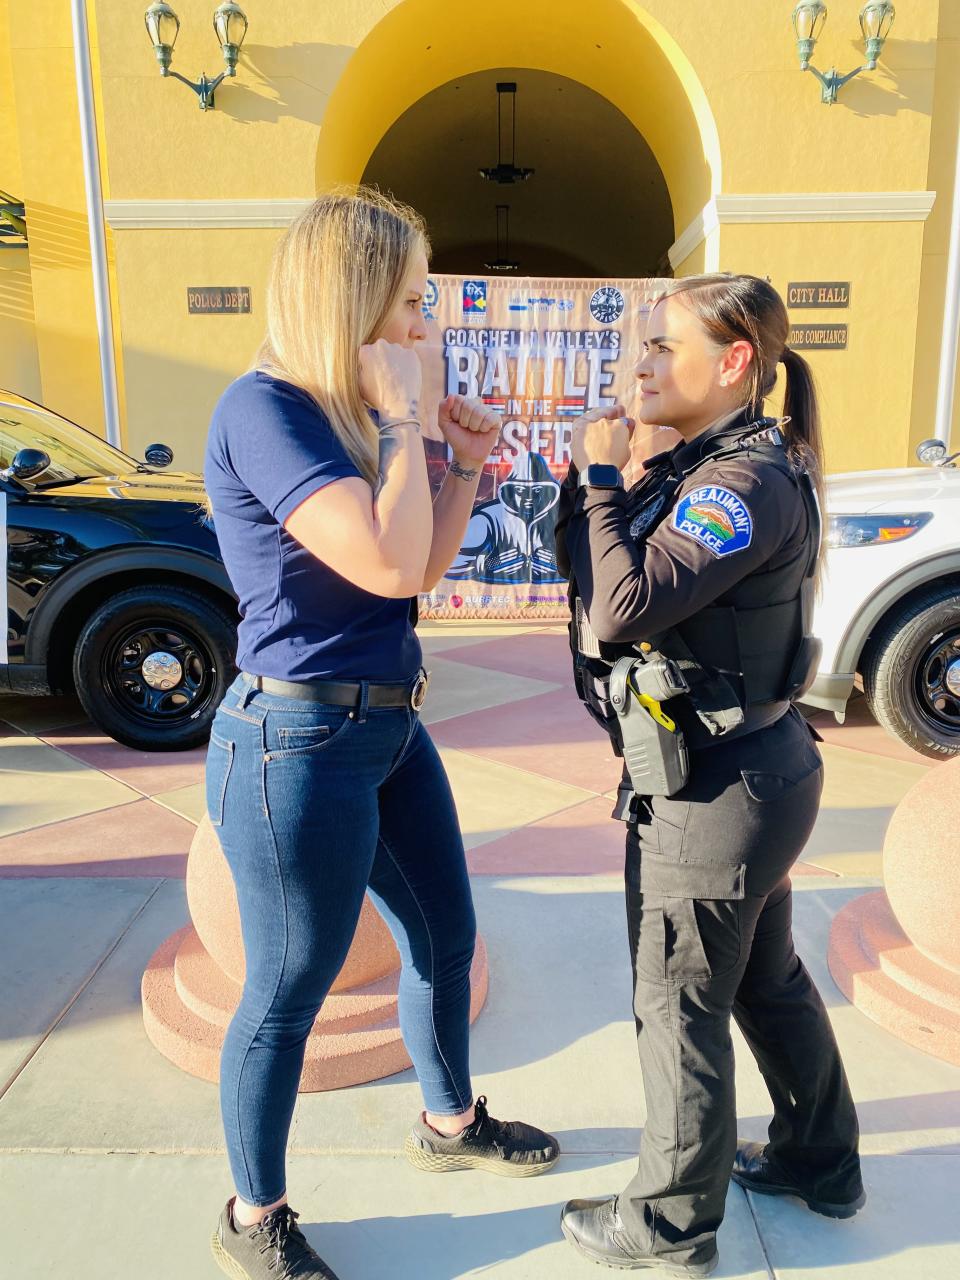 Palm Springs police dispatcher Samantha De La Cruz, left, and Beaumont police Officer Jessica Segovia will spar in a Battle in the Desert boxing match on Oct. 1.